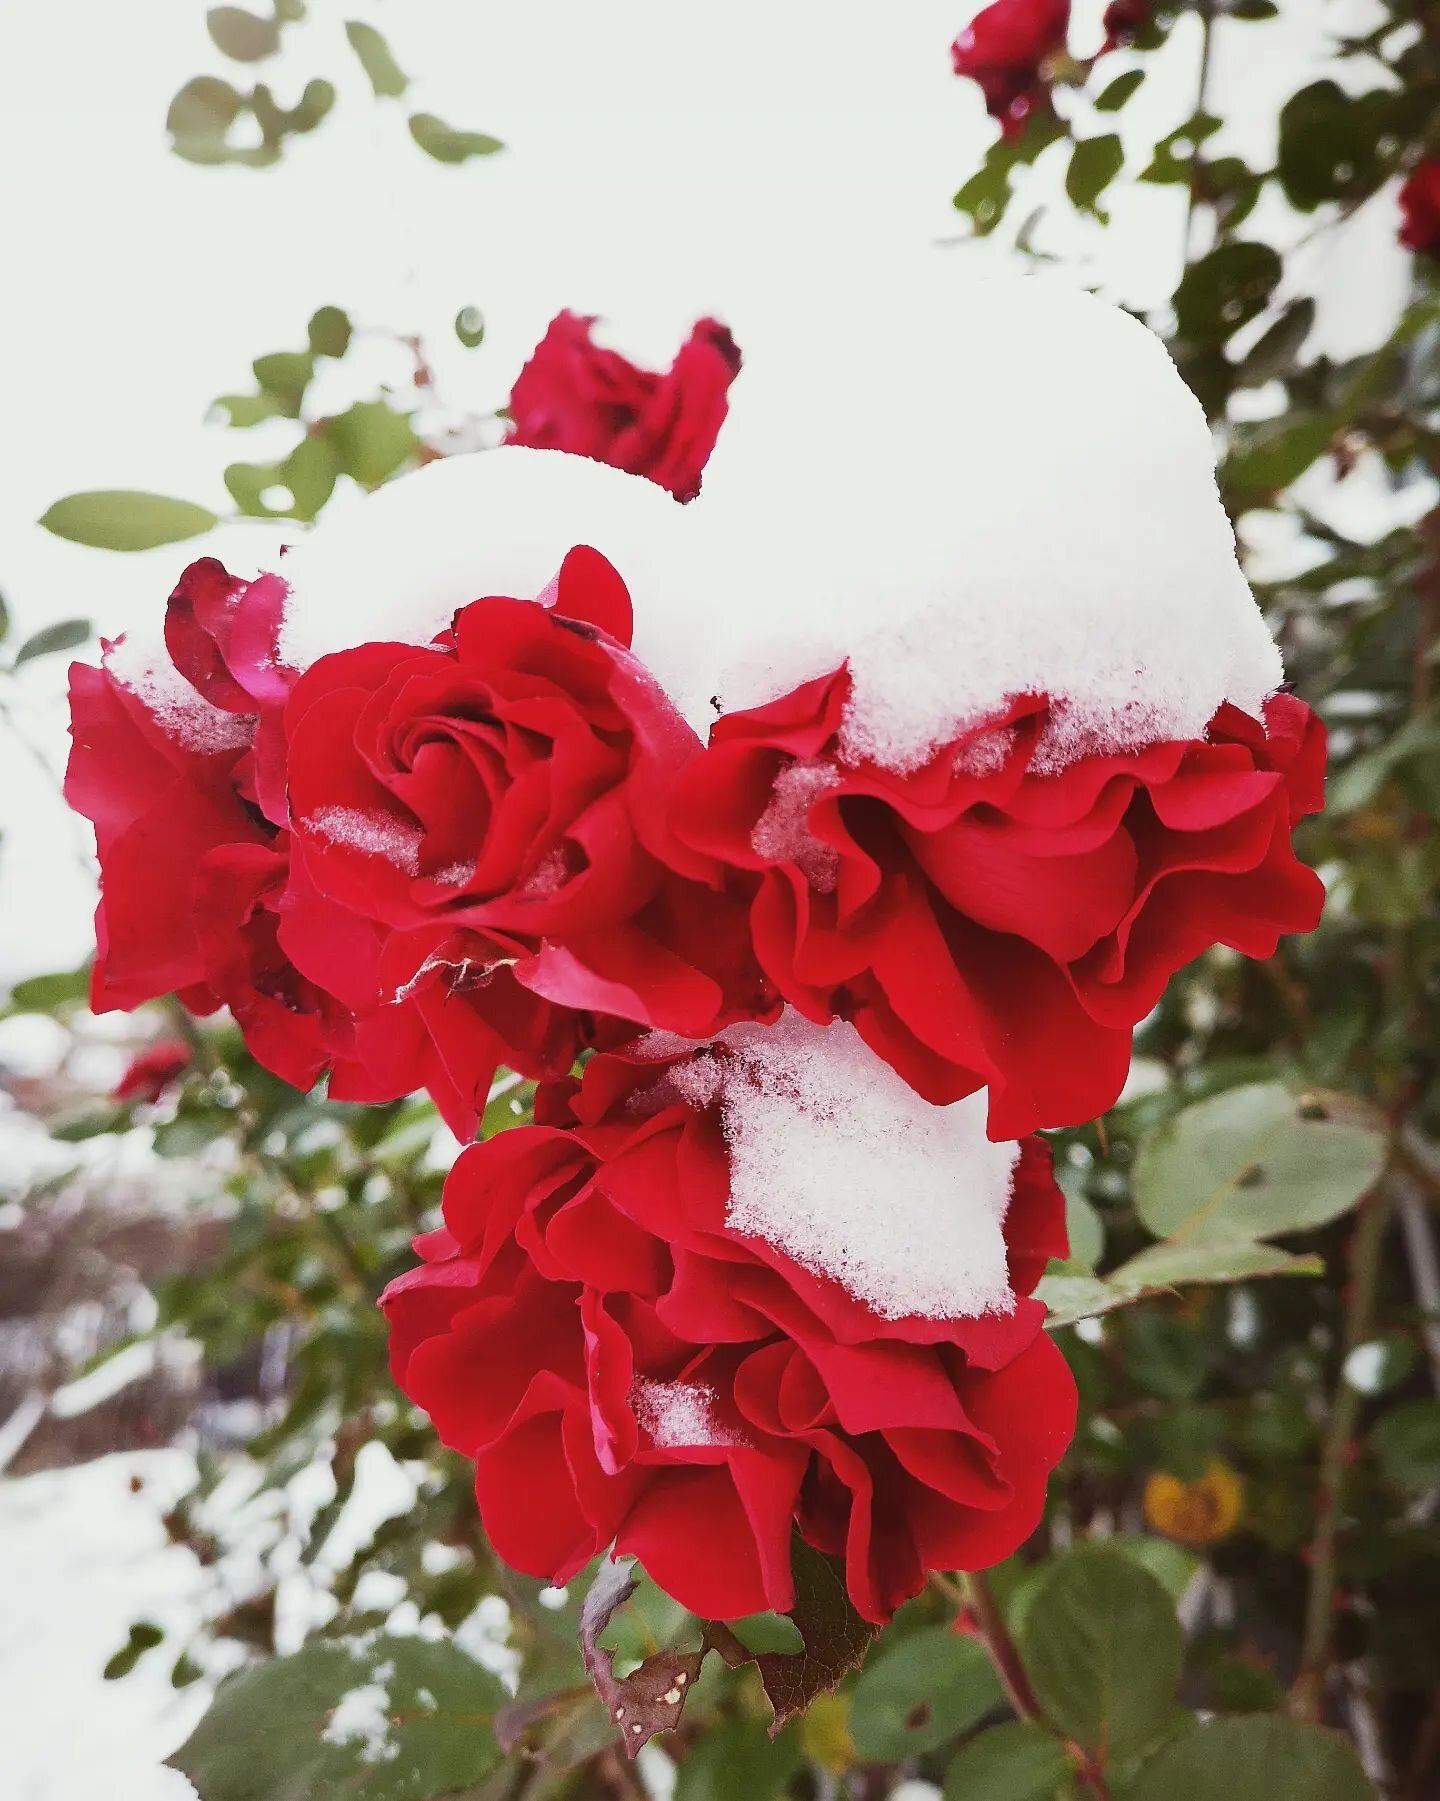 And there it was...
Winter.
#firstsnow #redroses